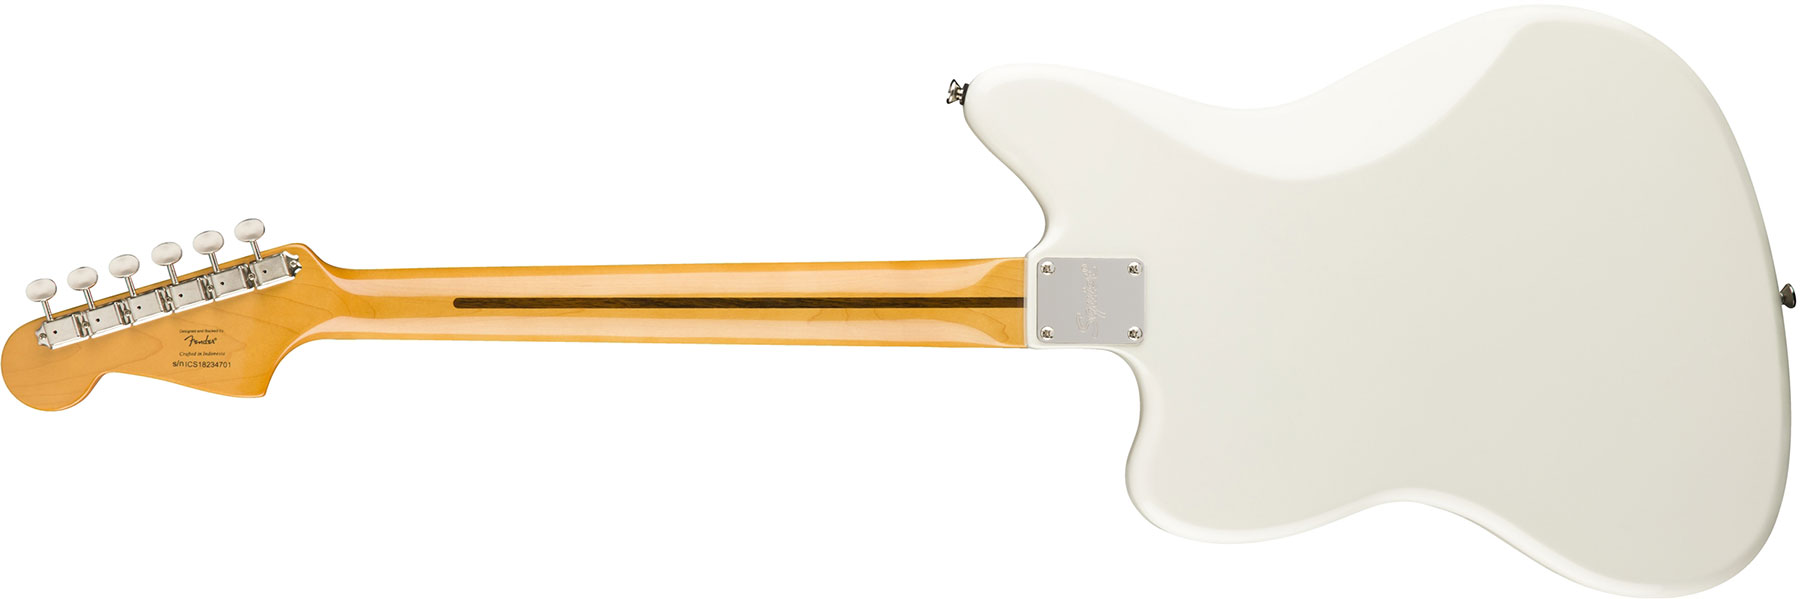 Squier Jazzmaster Classic Vibe 60s 2019 Lau - Olympic White - Retro rock electric guitar - Variation 1